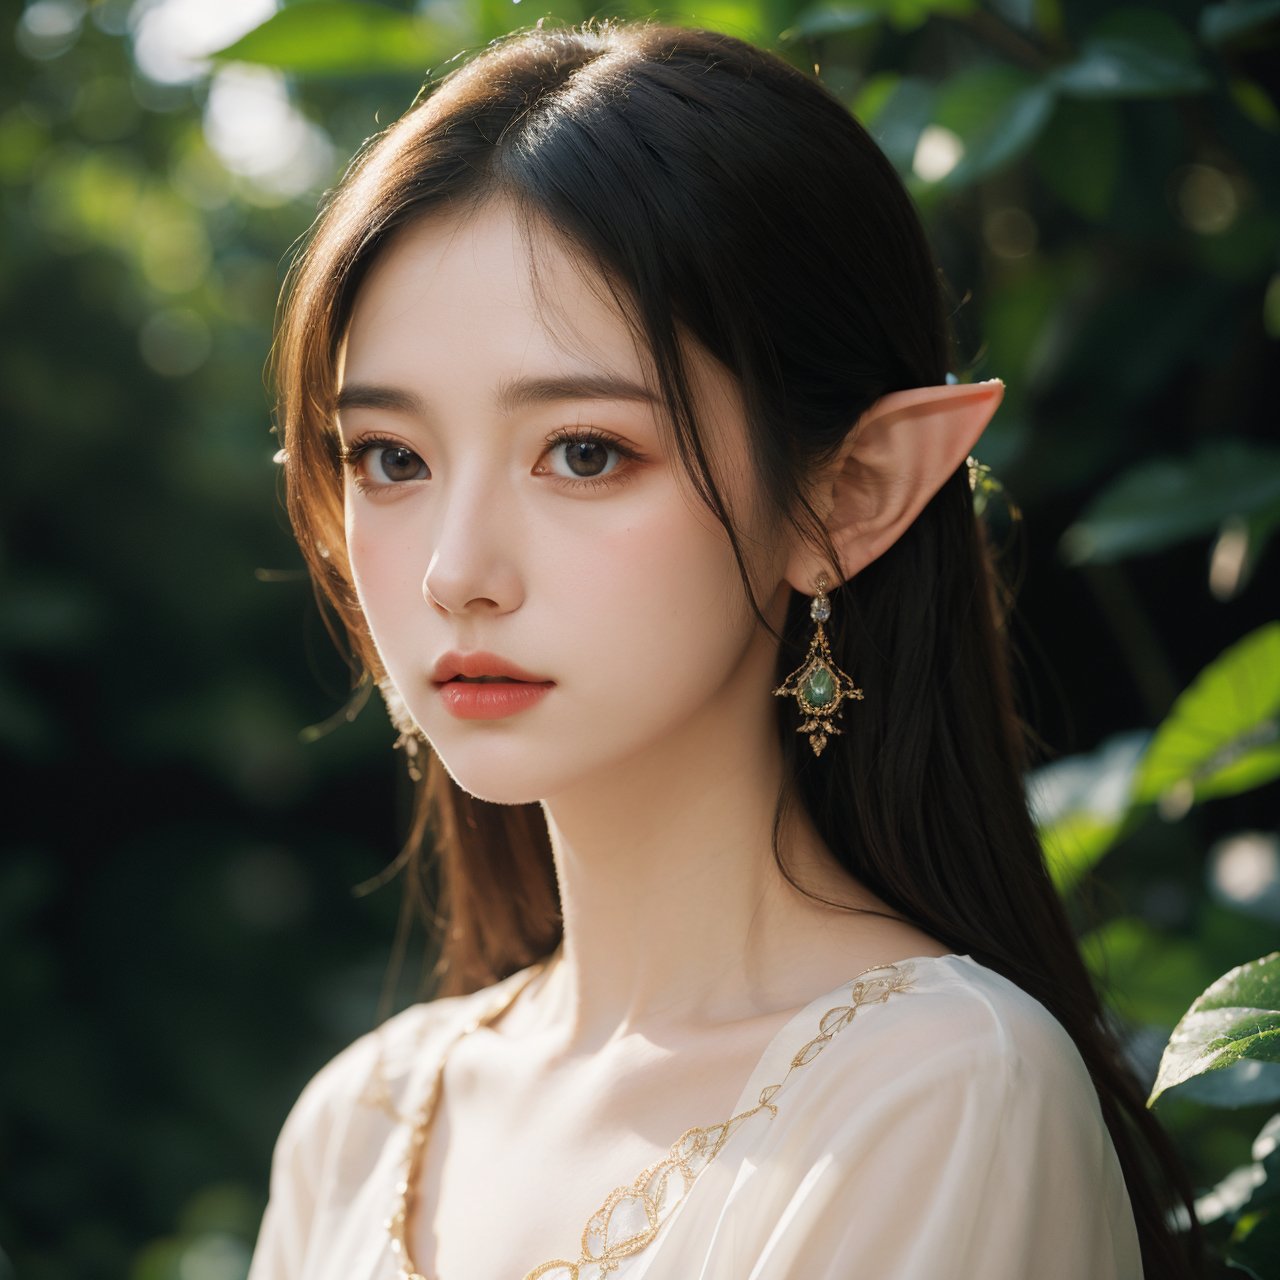 elf portrait,enchanting beauty,fantasy,ethereal glow,pointed ears,delicate facial features,long elegant hair,nature-themed attire,mystical ambiance,soft lighting,tranquil expression,harmonious with nature,subtle magical elements,serene,intricate jewelry,dreamlike quality,pastel colors,